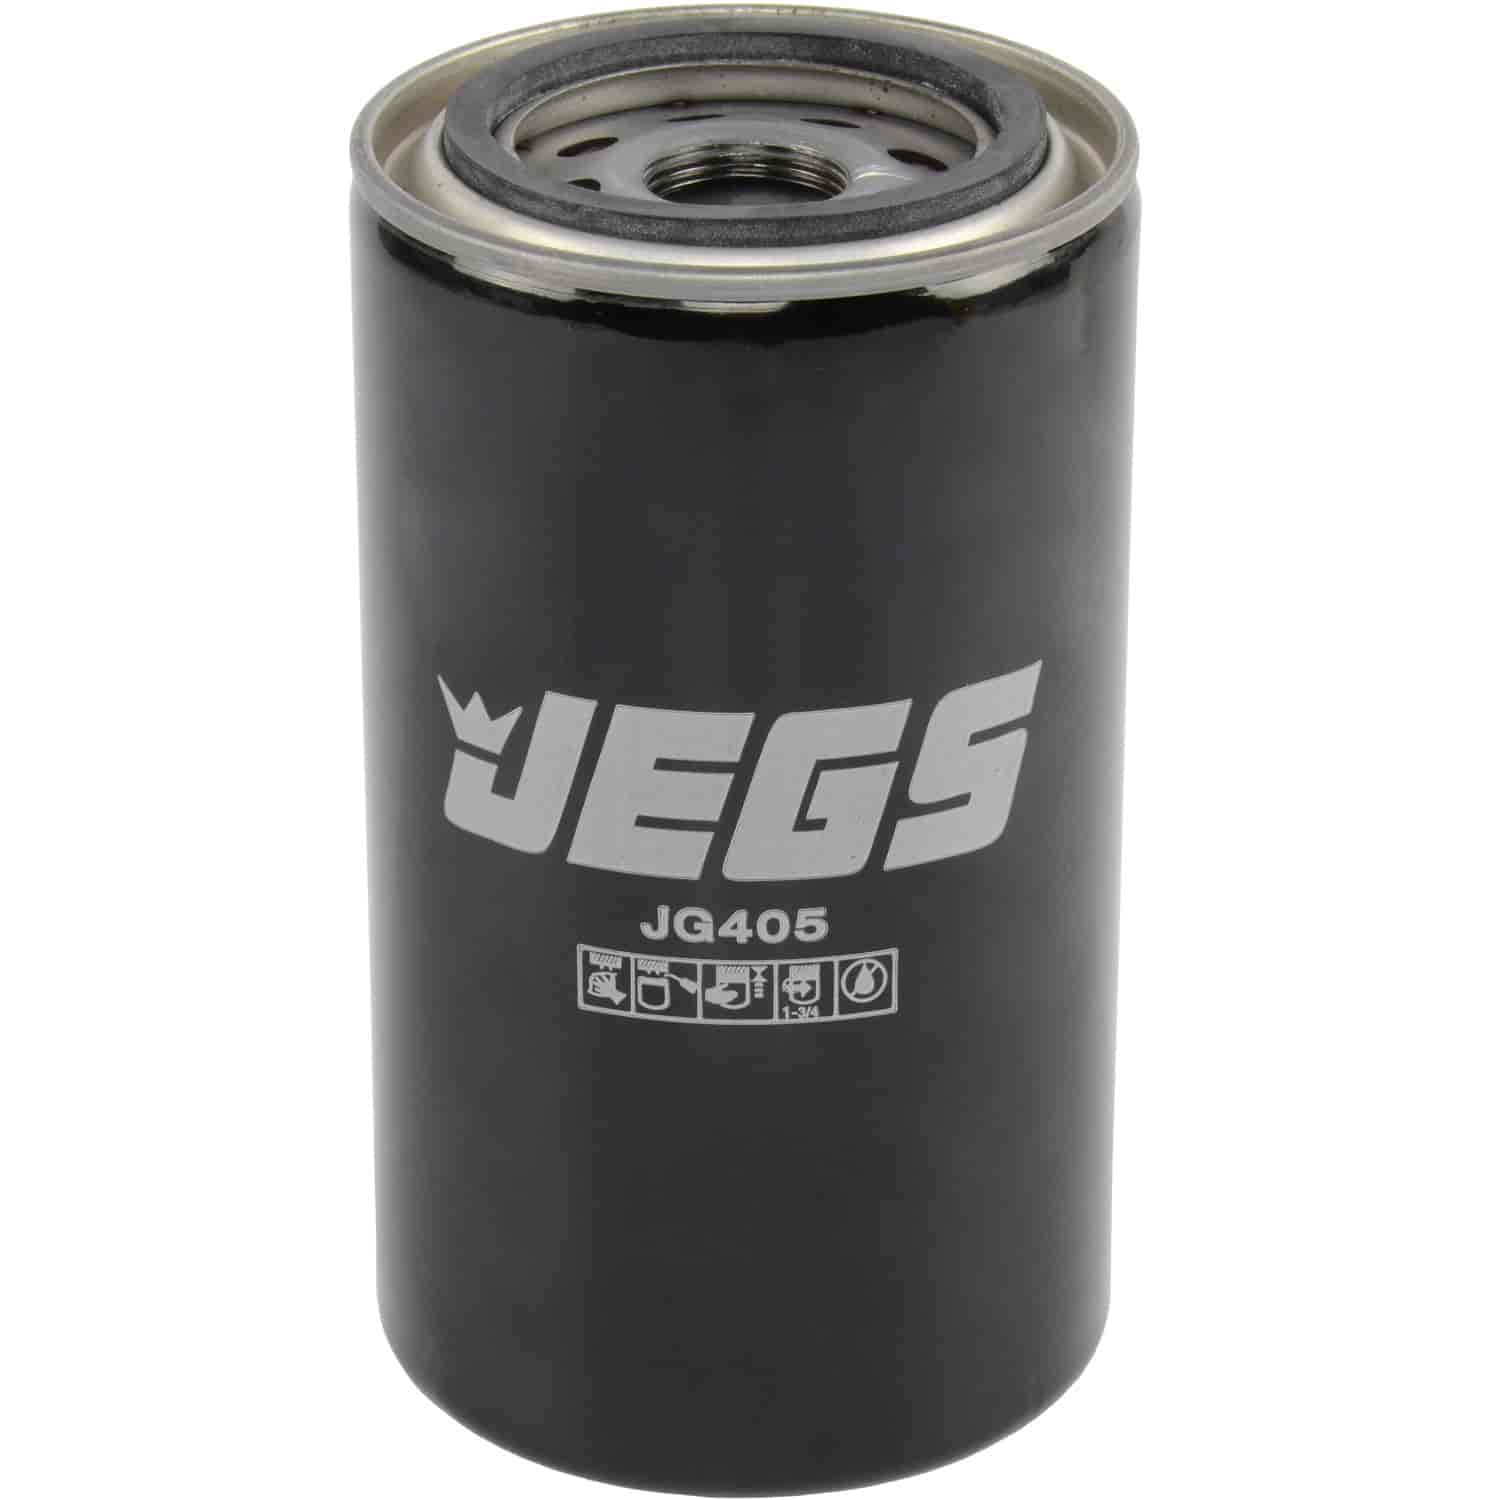 Performance Ford Diesel Oil Filter, 6.88 in. High, 1-1/8"-16 UNF Thread